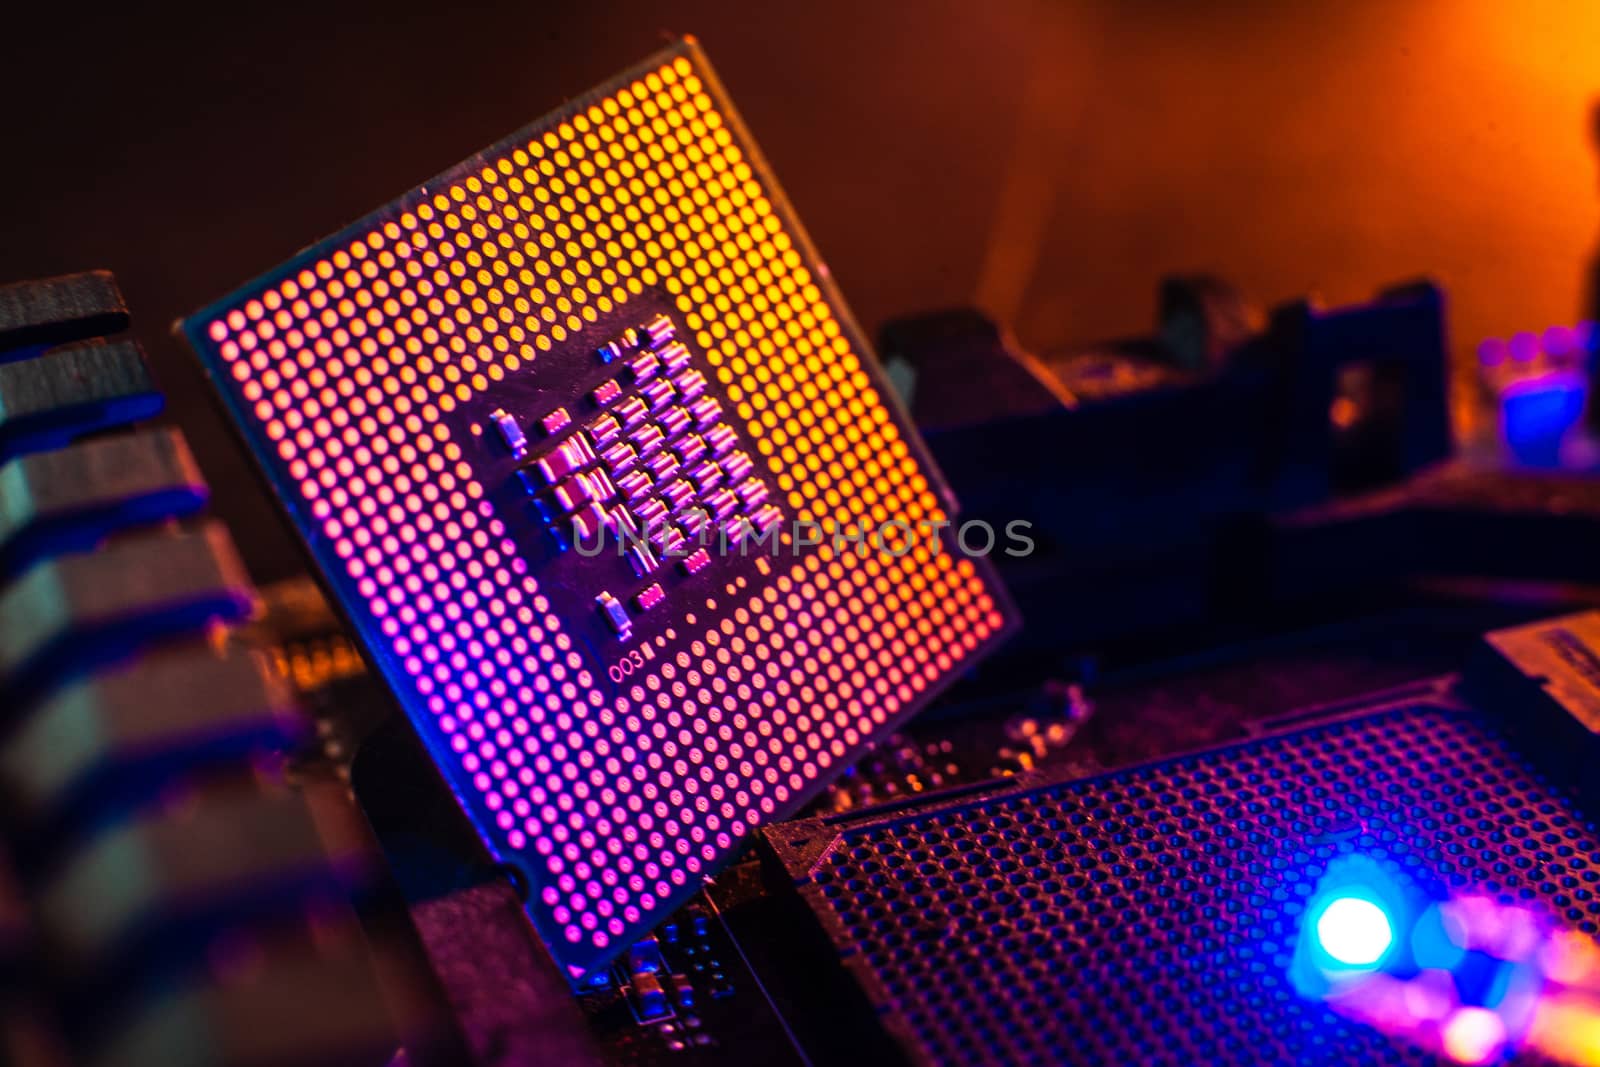 Processor with neon light. Large photo with blue-yellow light on by Opikanets